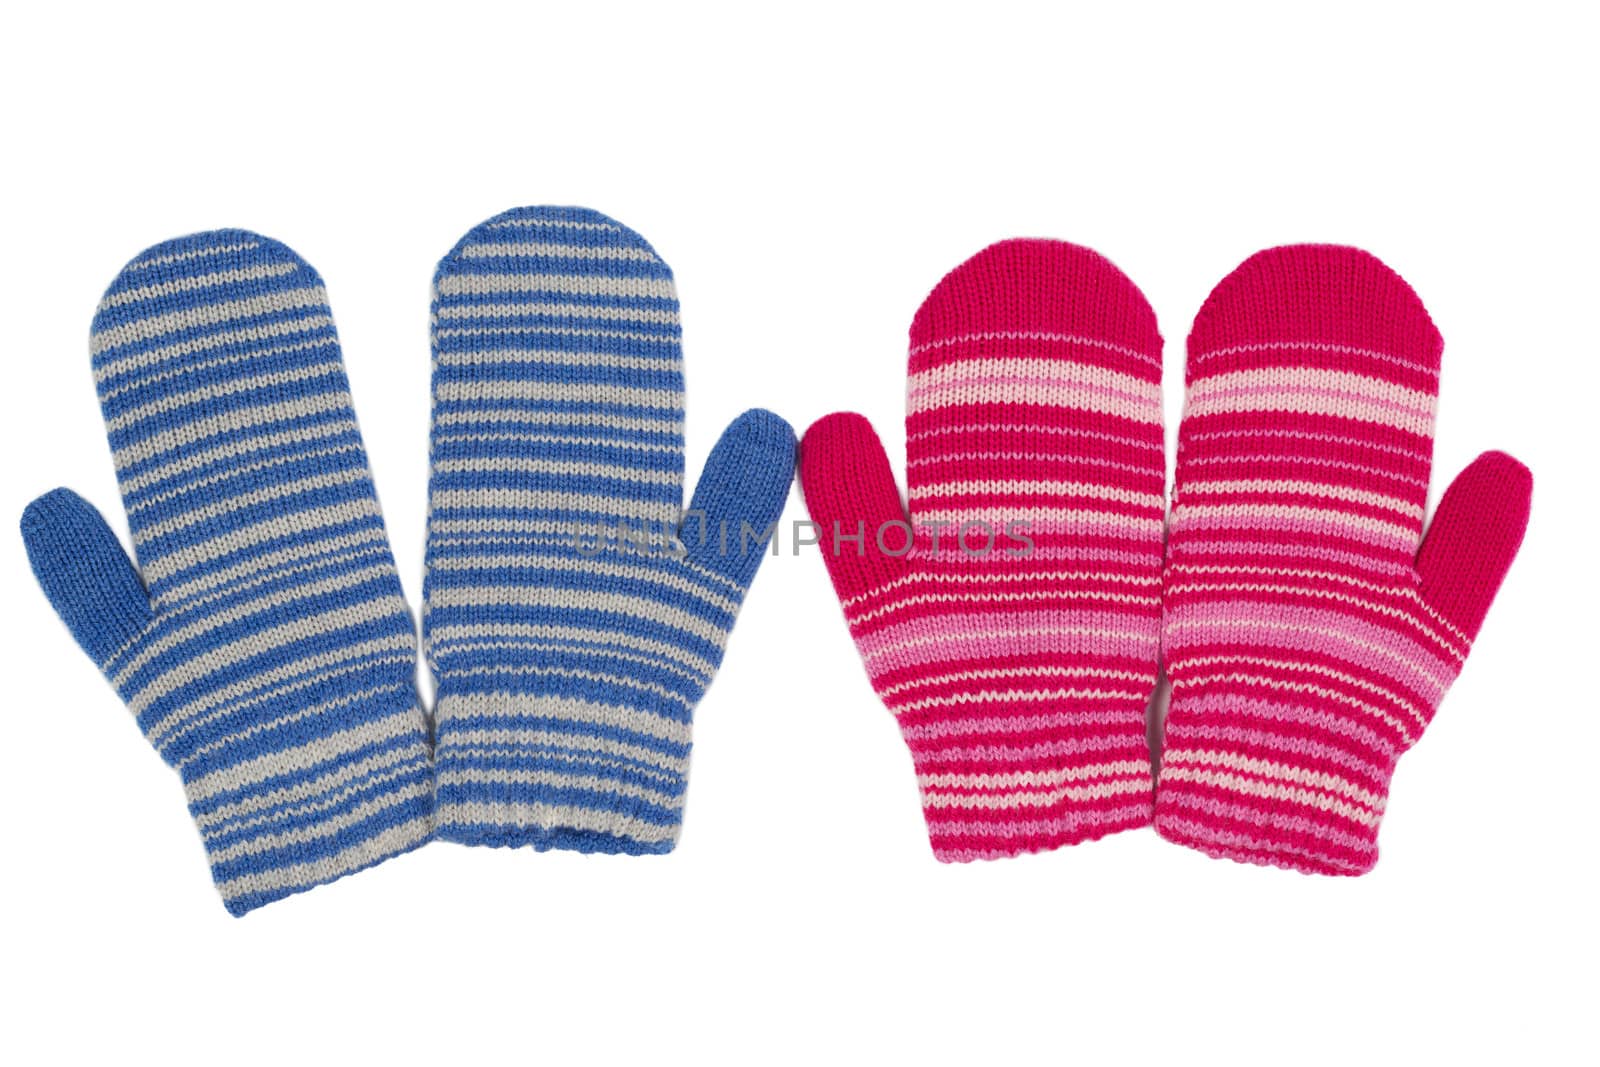 Two pairs of mittens, blue and red. Isolate on white.